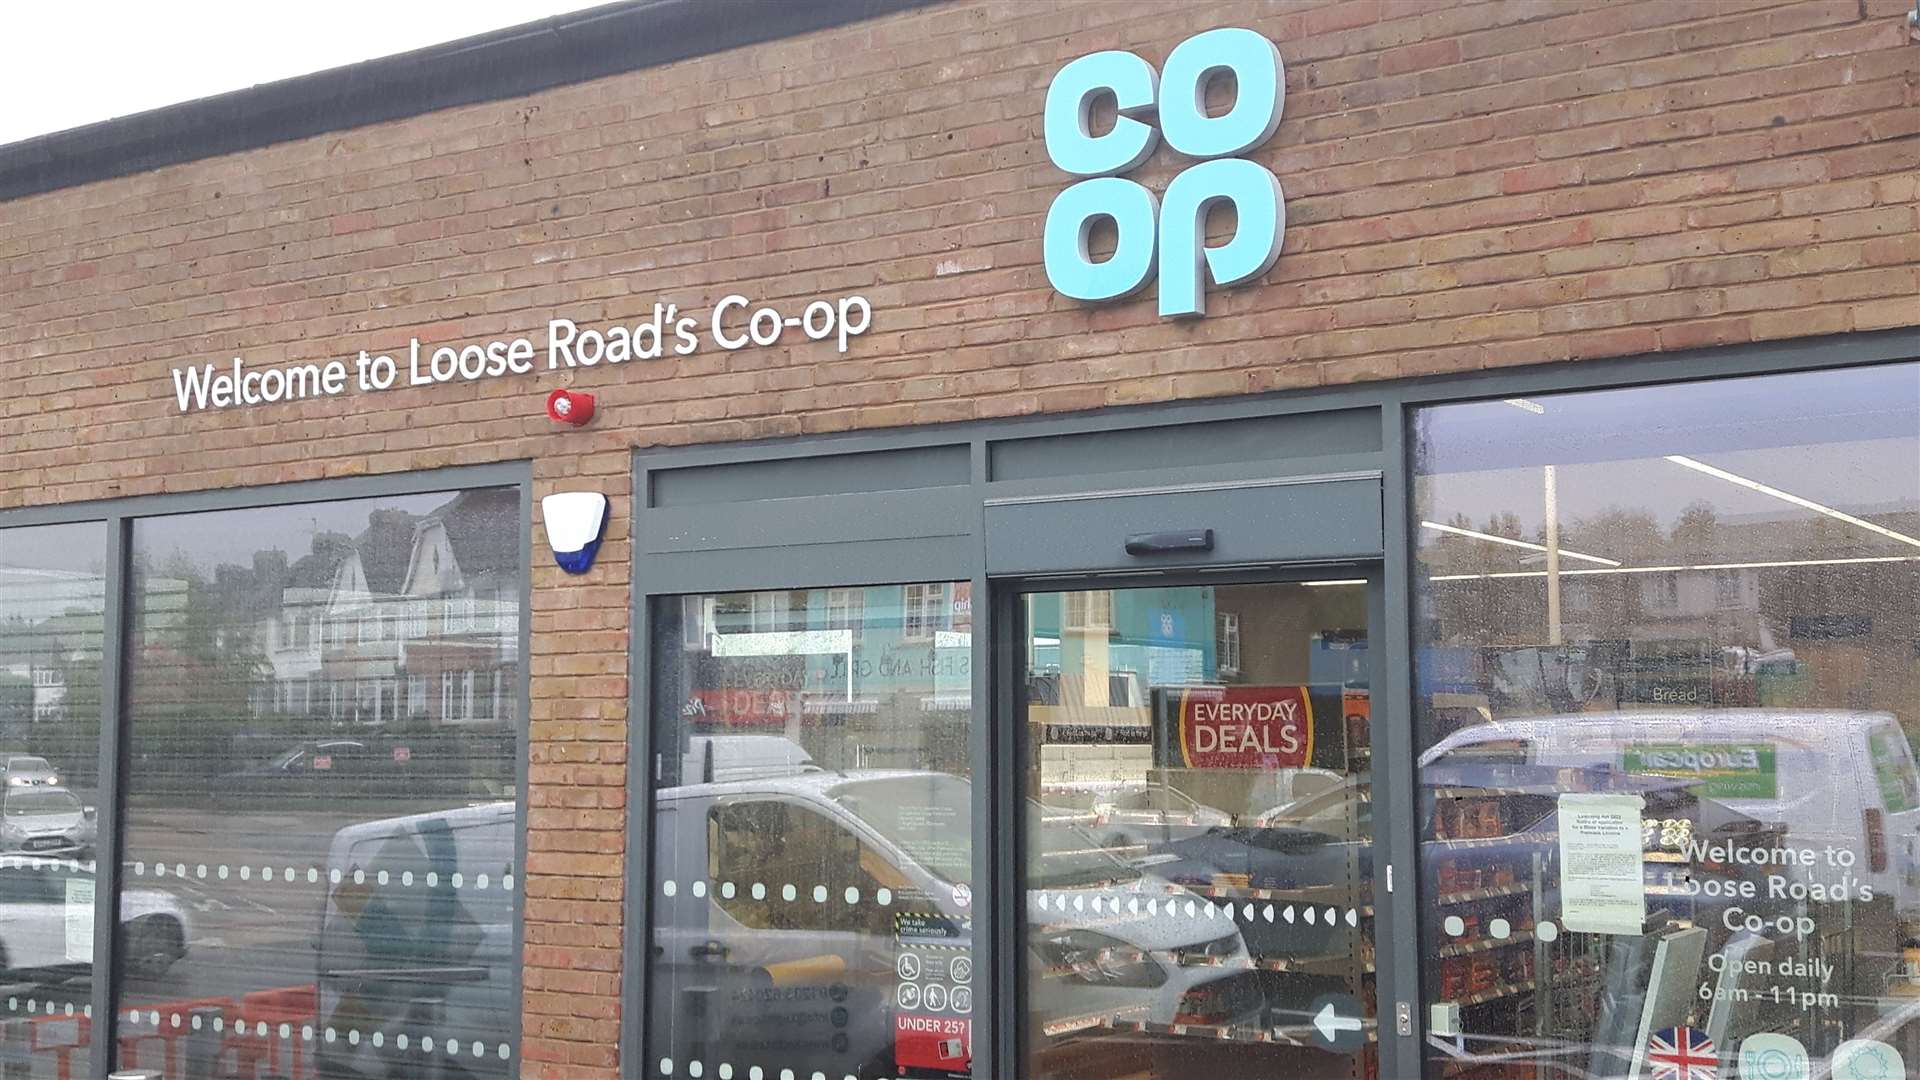 Co-op opens new store on Loose Road in Maidstone